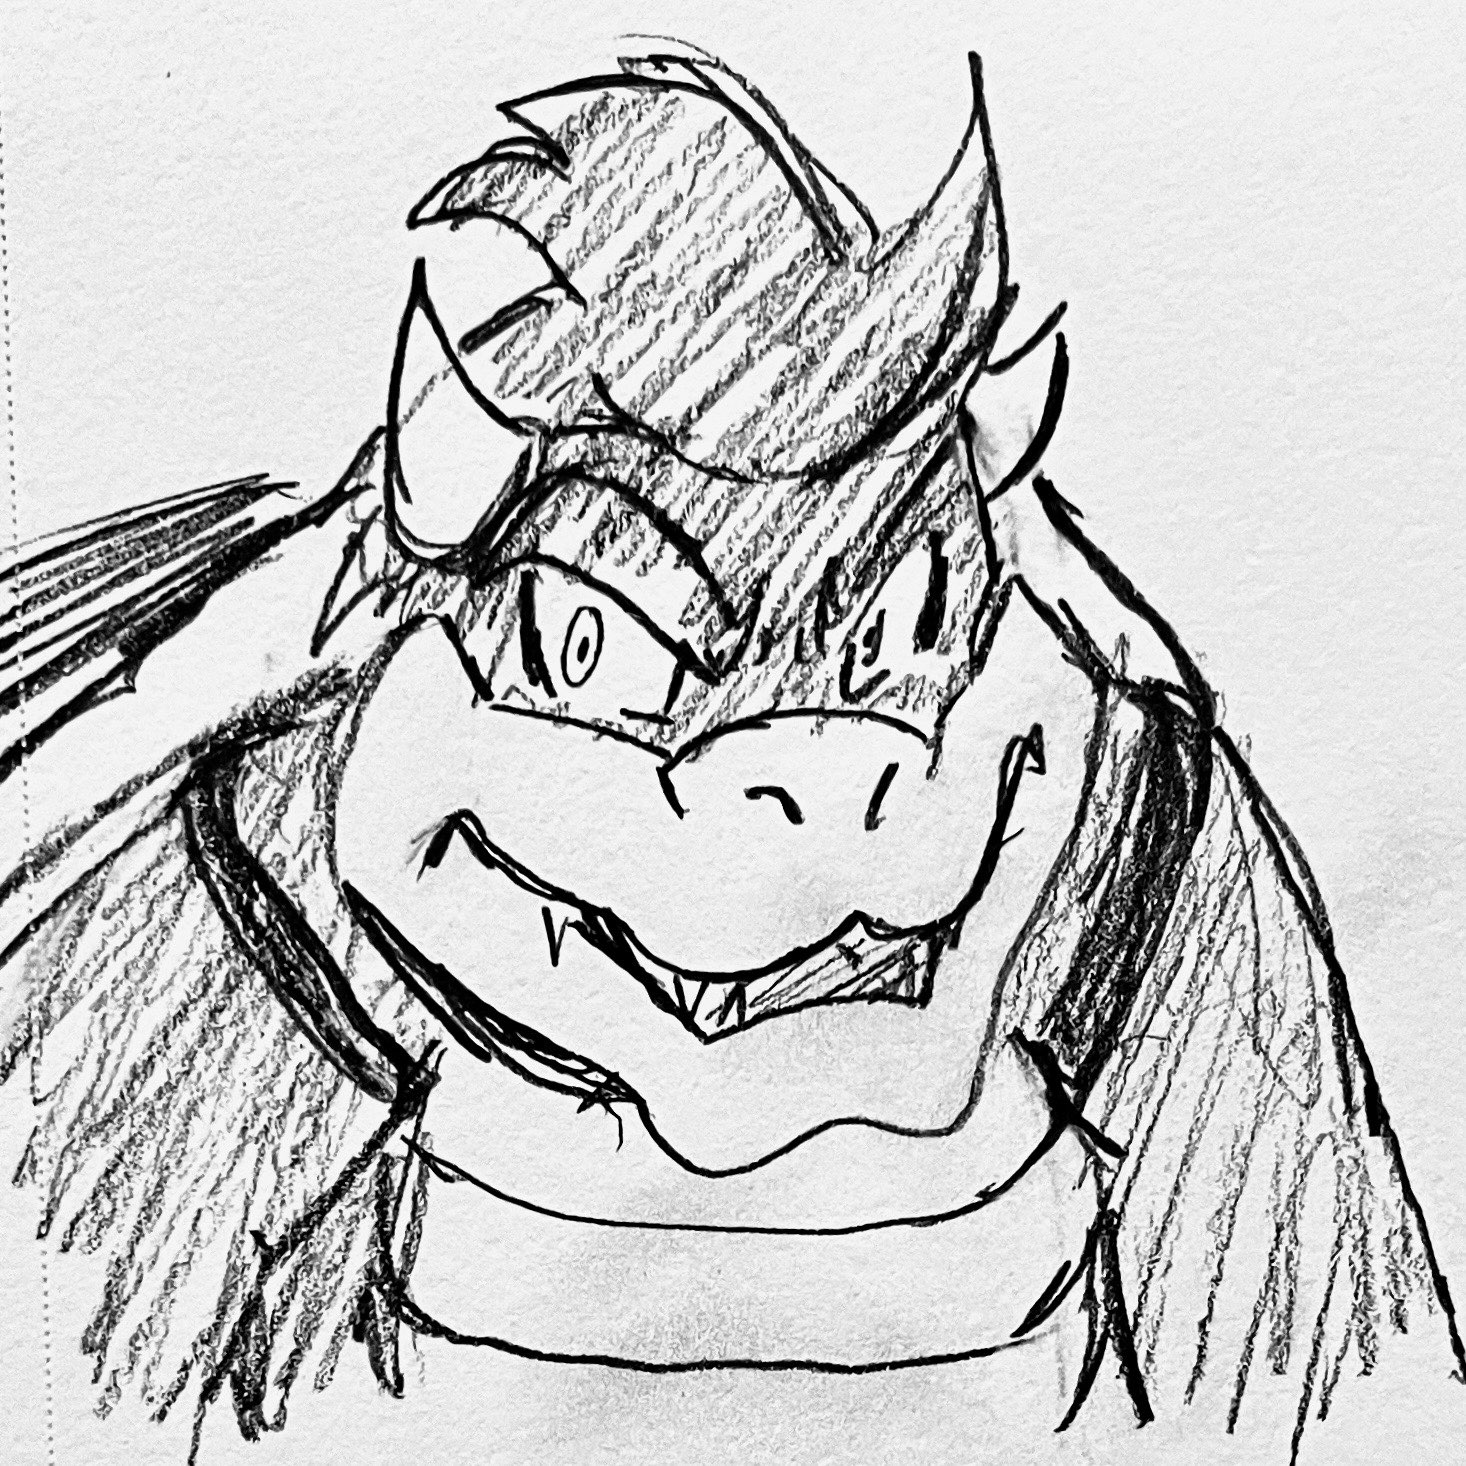 Bowser by xoetrope